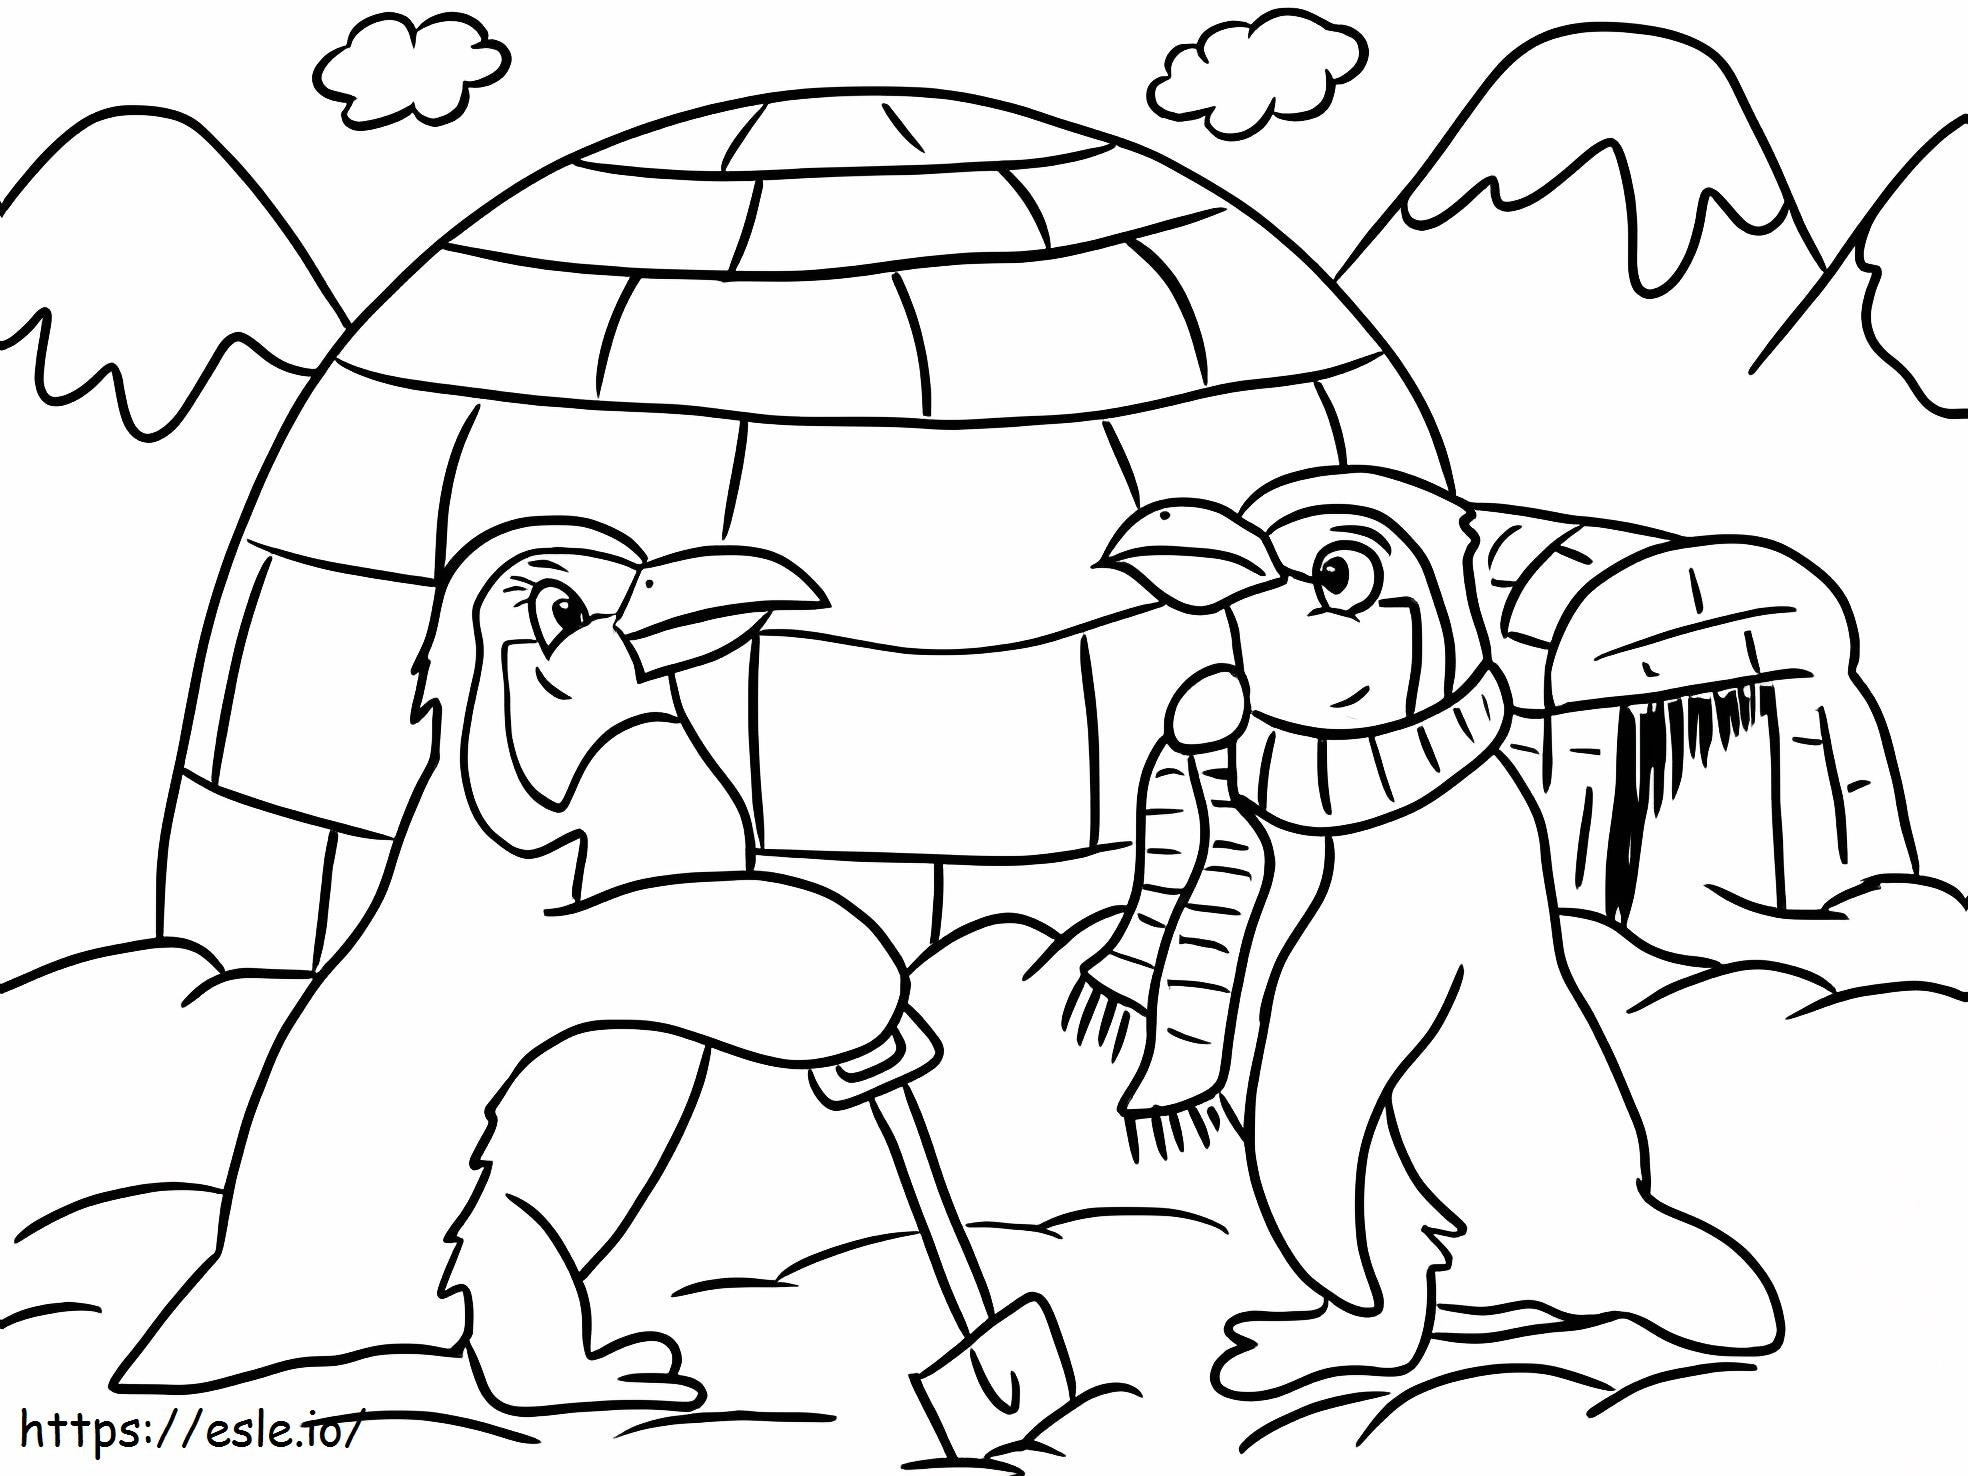 Penguins And Igloo coloring page